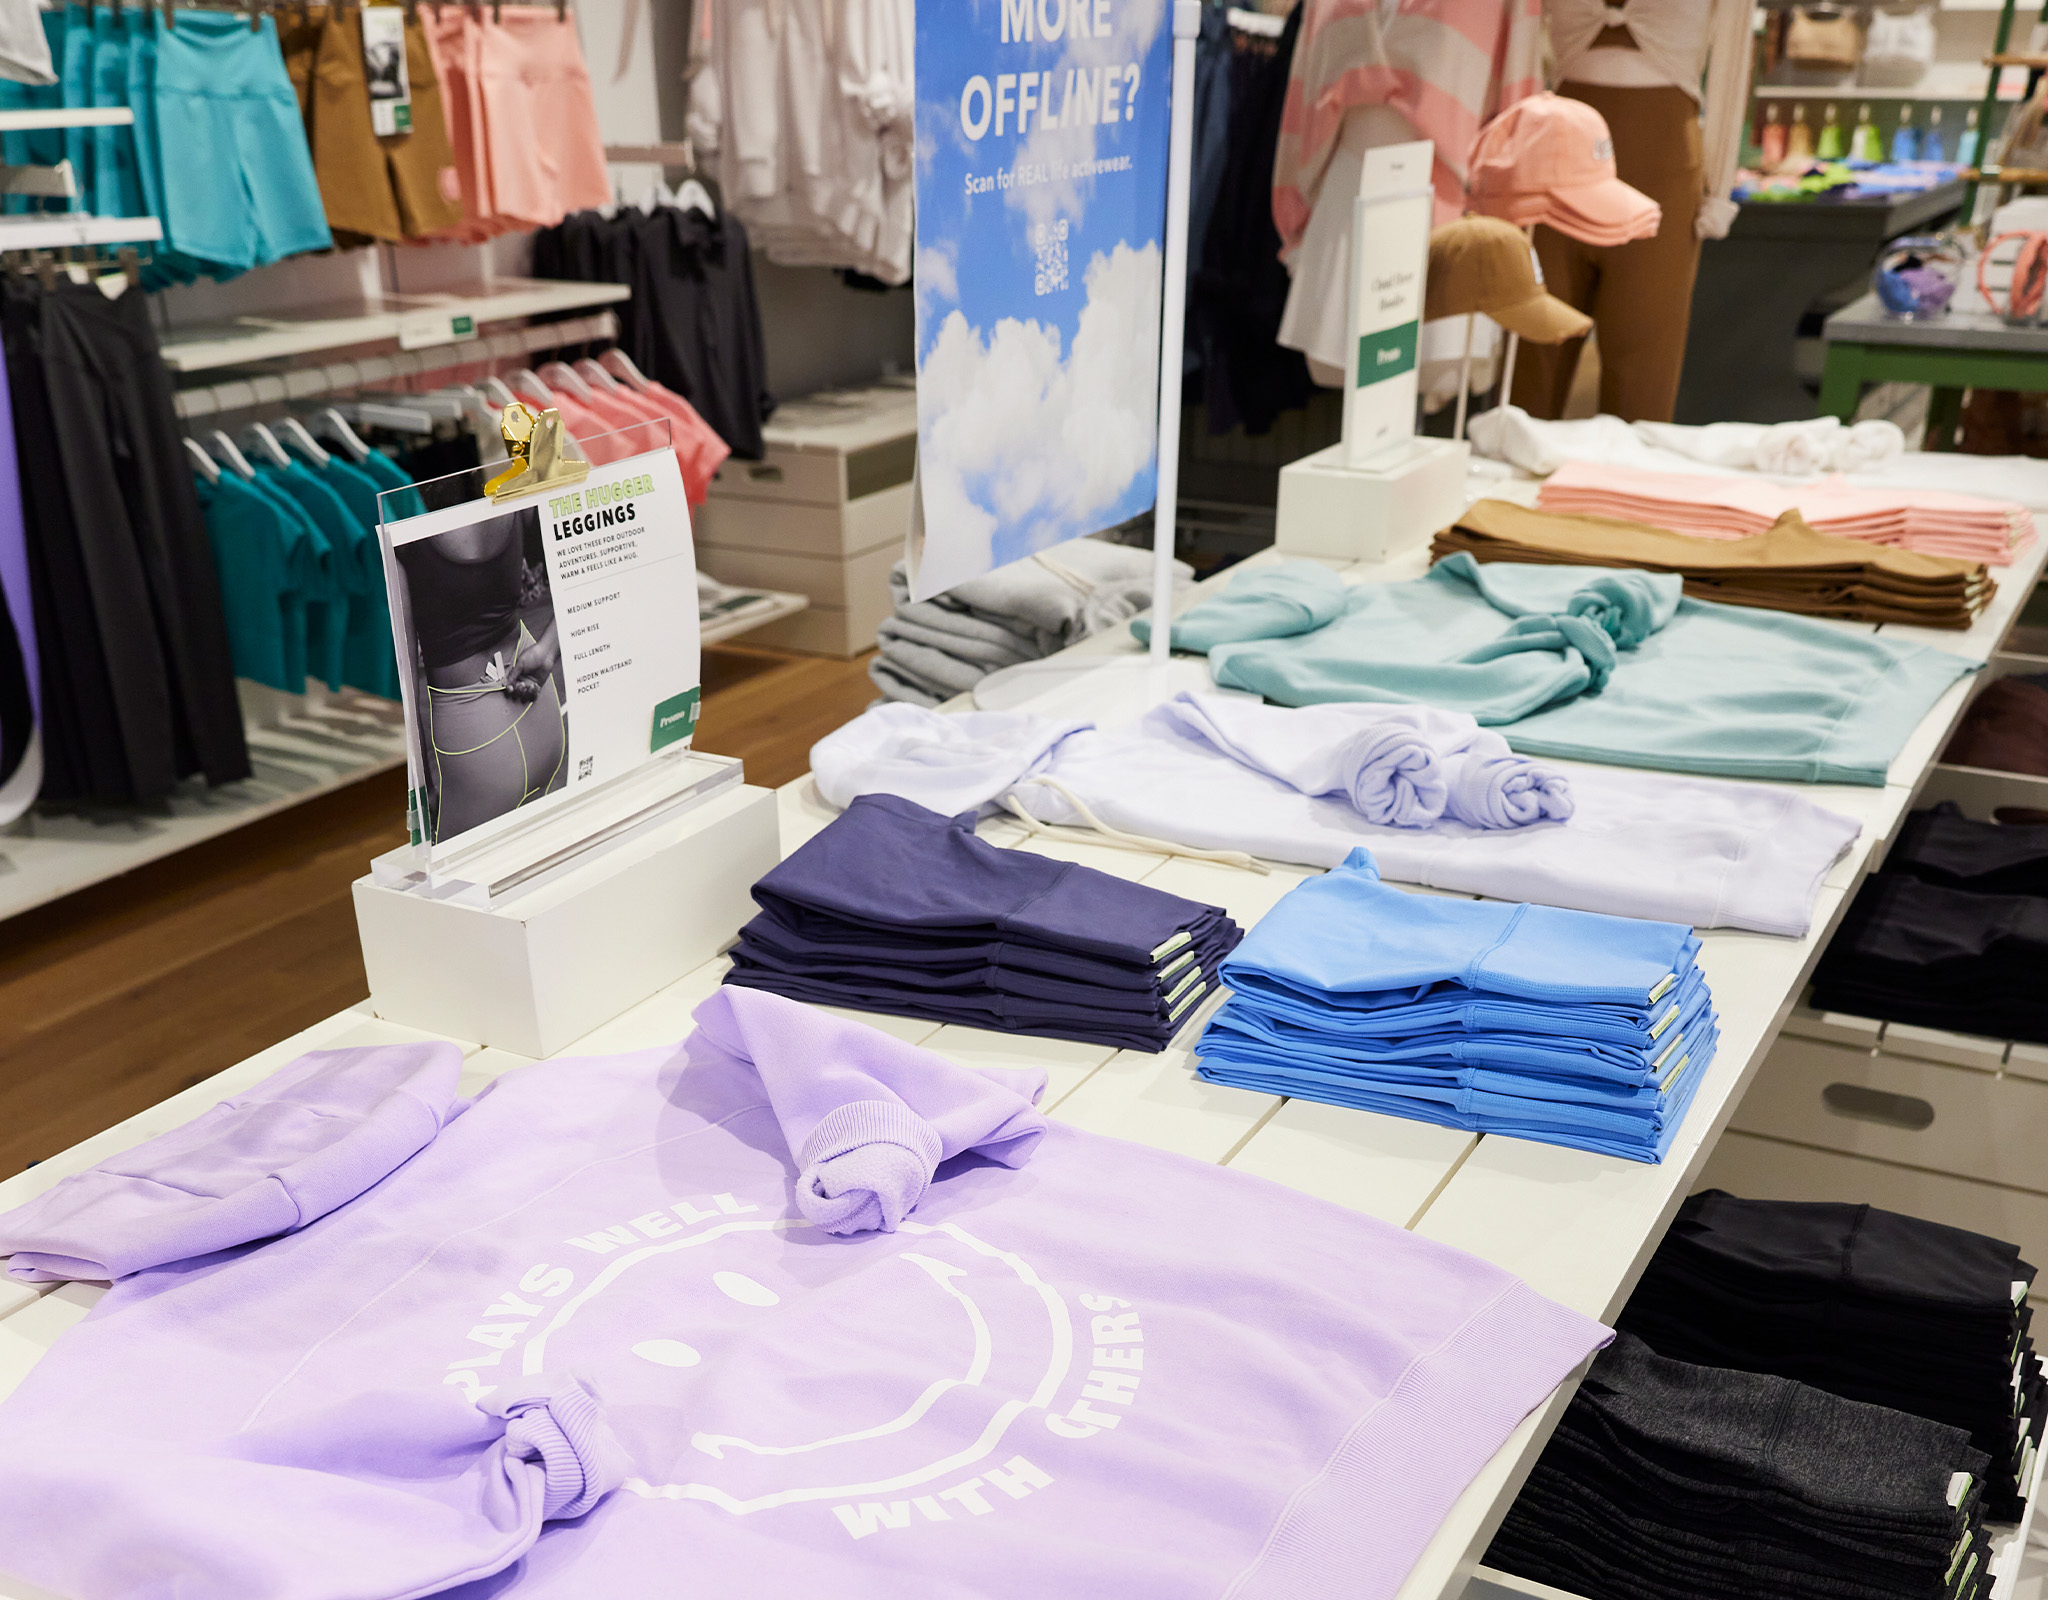 Aerie x Liberare: The Disability Partnership You've Been Waiting